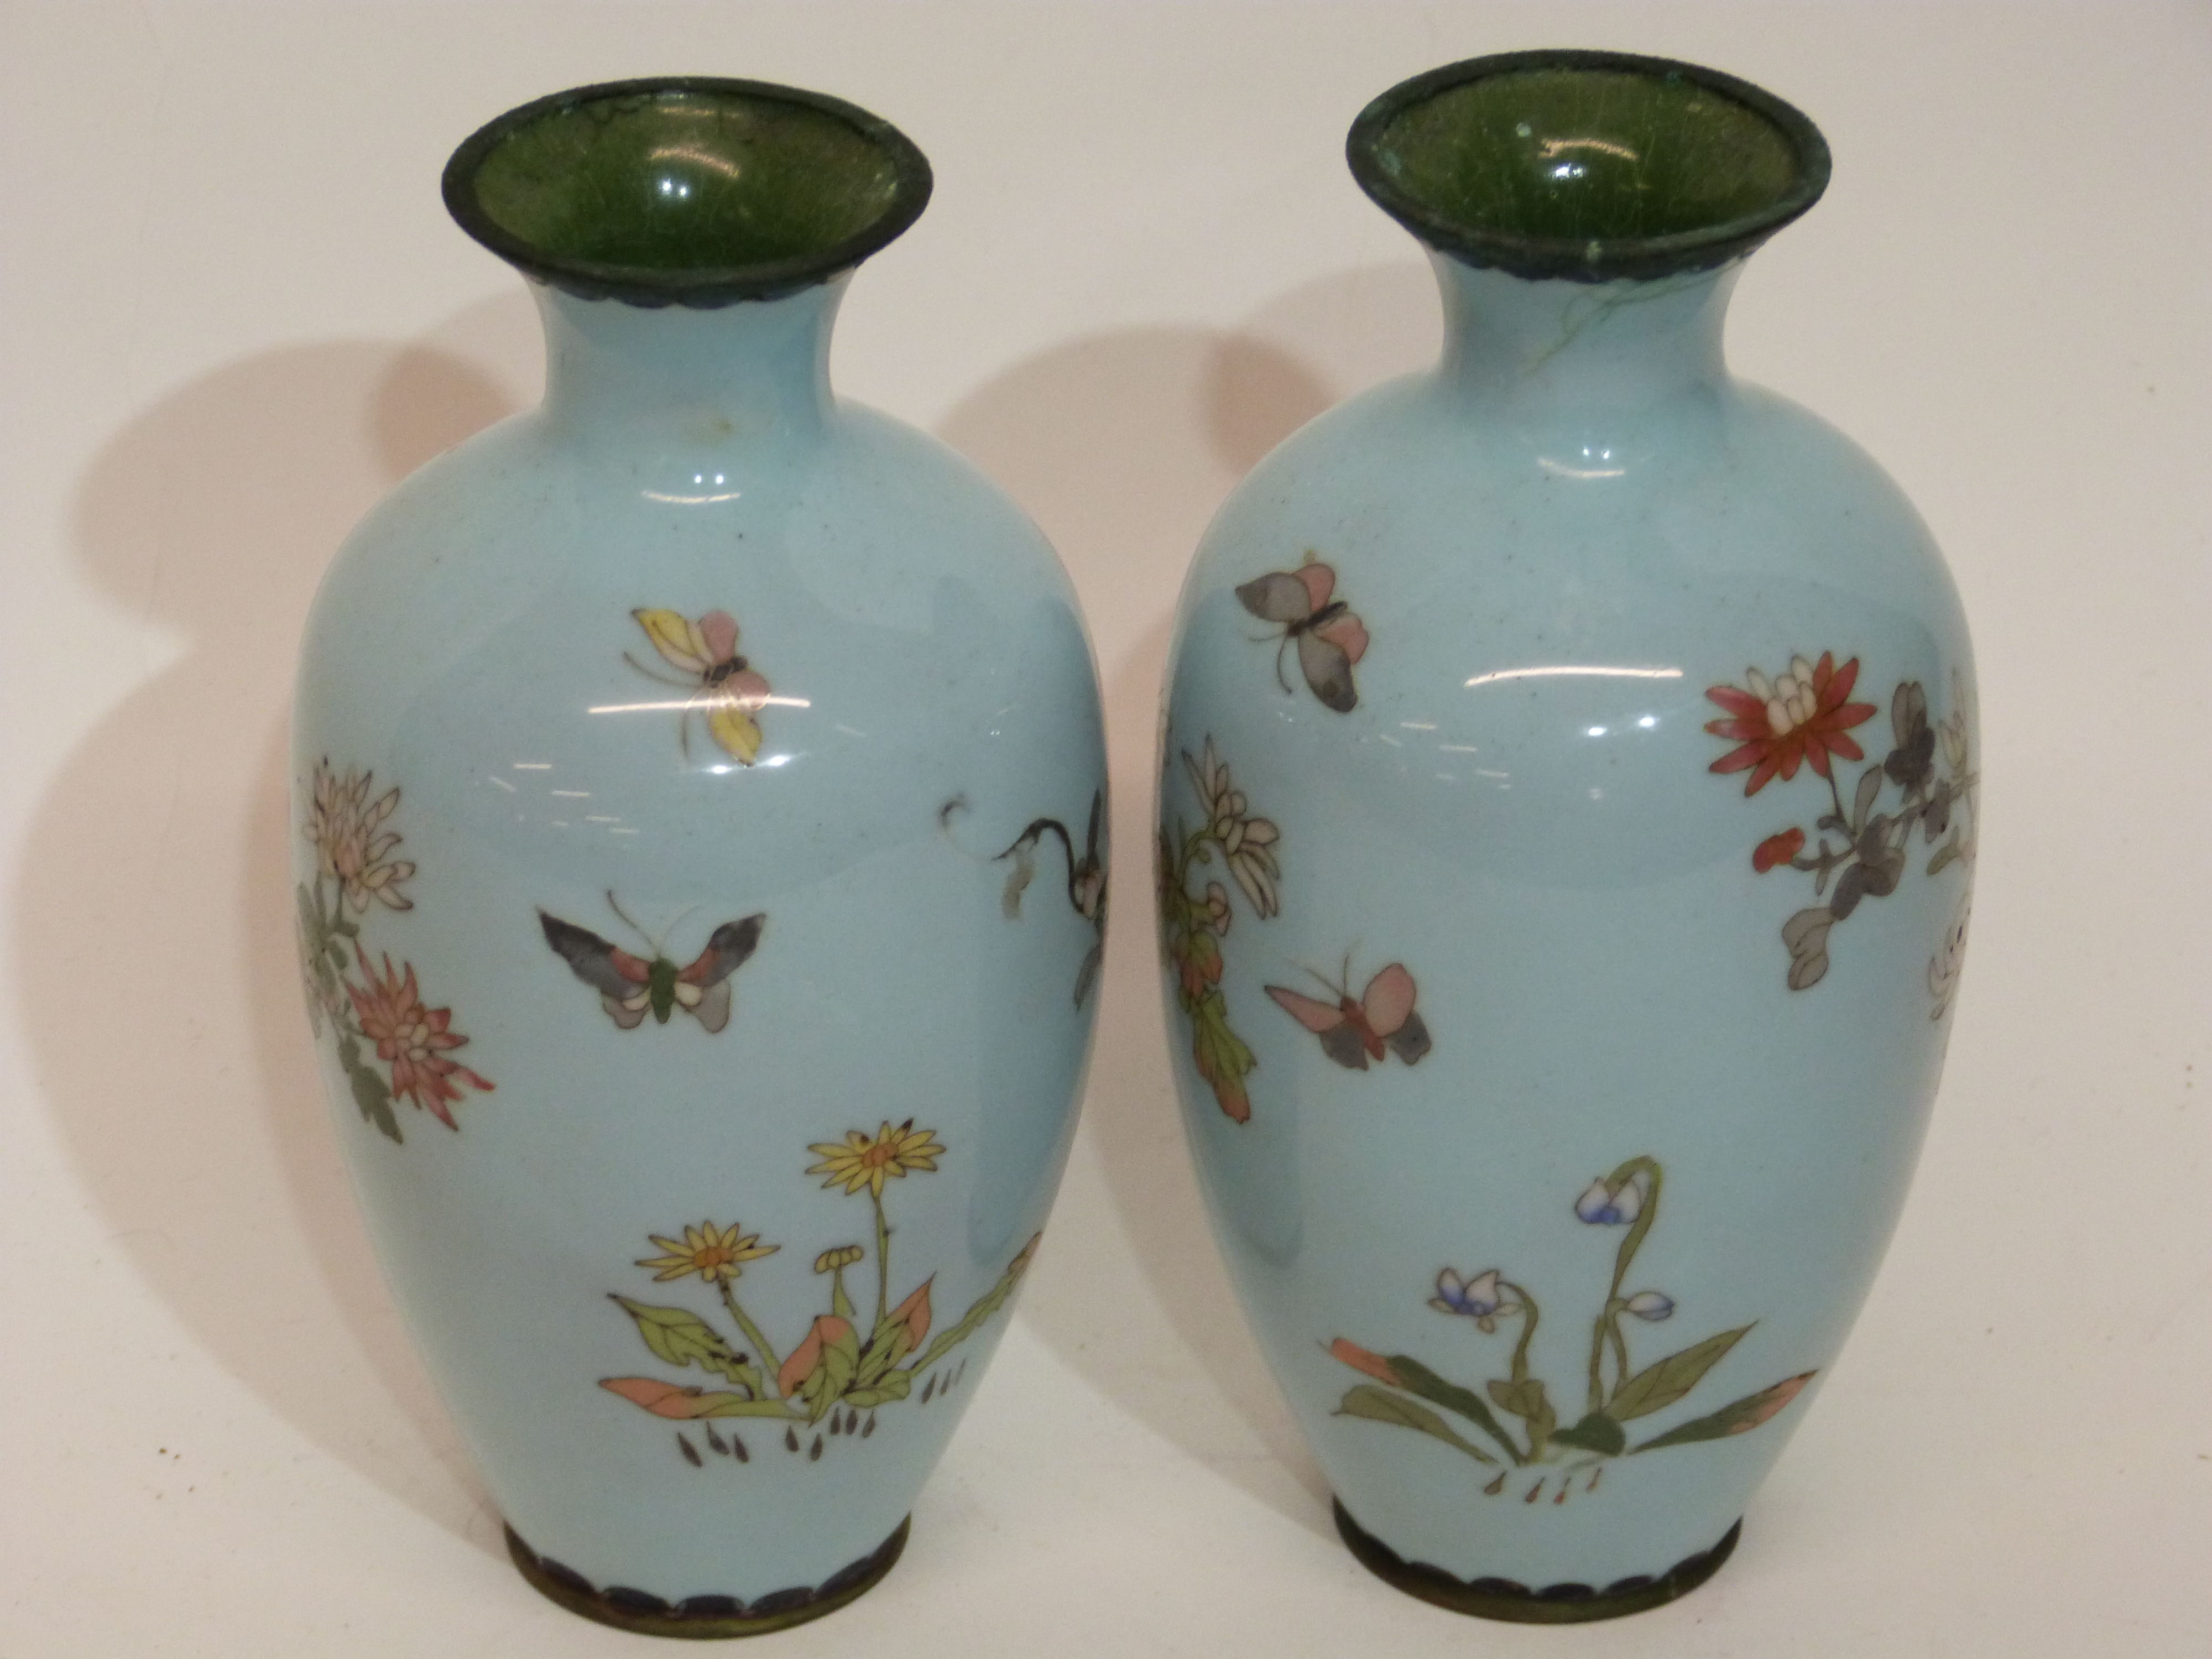 Pair of Japanese cloisonne vases, Meiji period, the light blue ground decorated with foliage and - Image 2 of 4